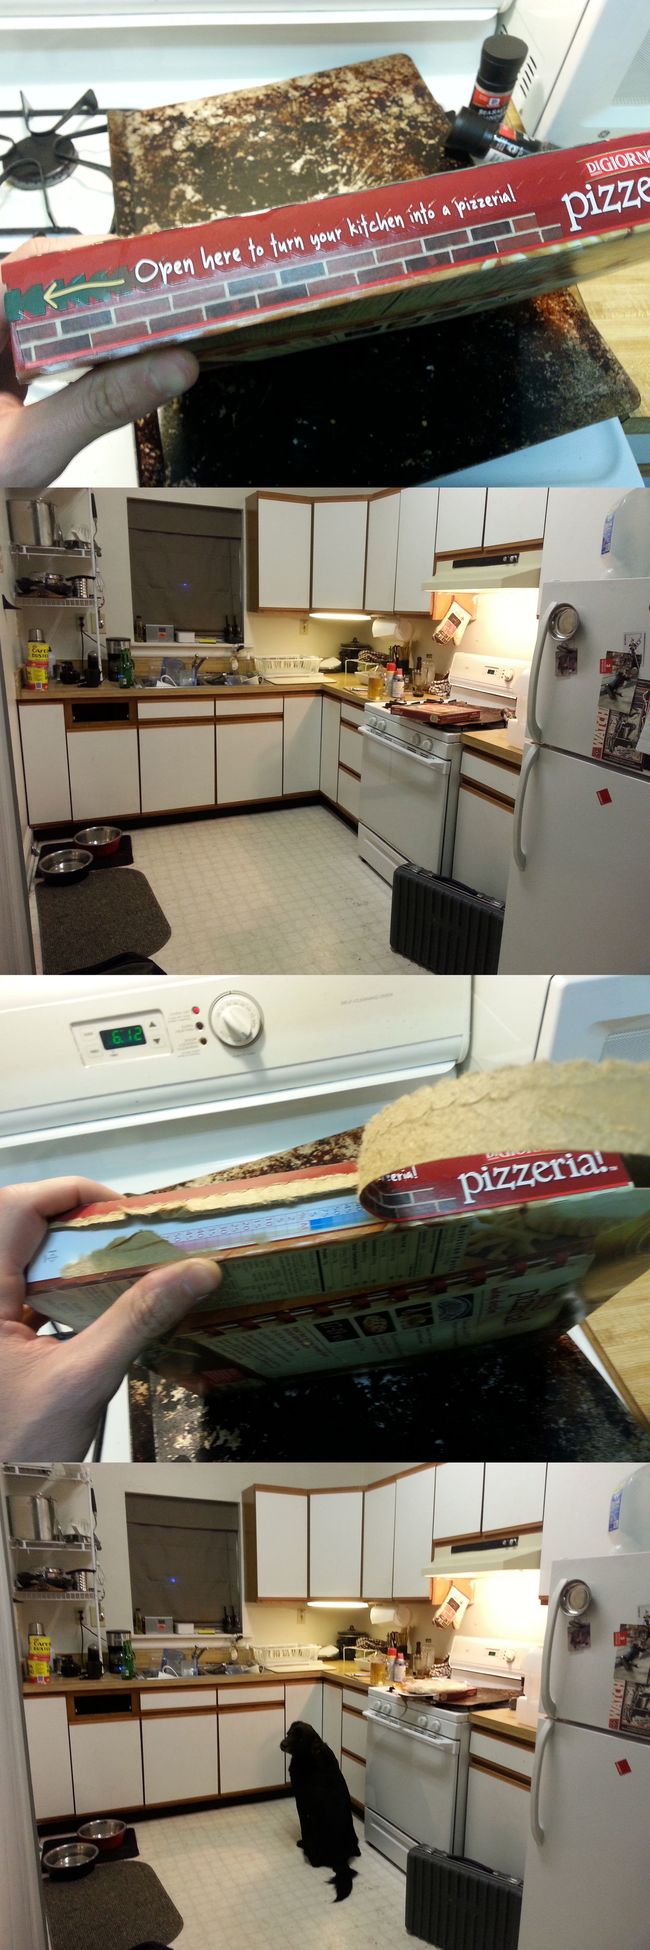 expectation vs reality 640 High - Digiorn I pizze e Open here to turn your kitchen into a pizzerial Watch I pizzeria..